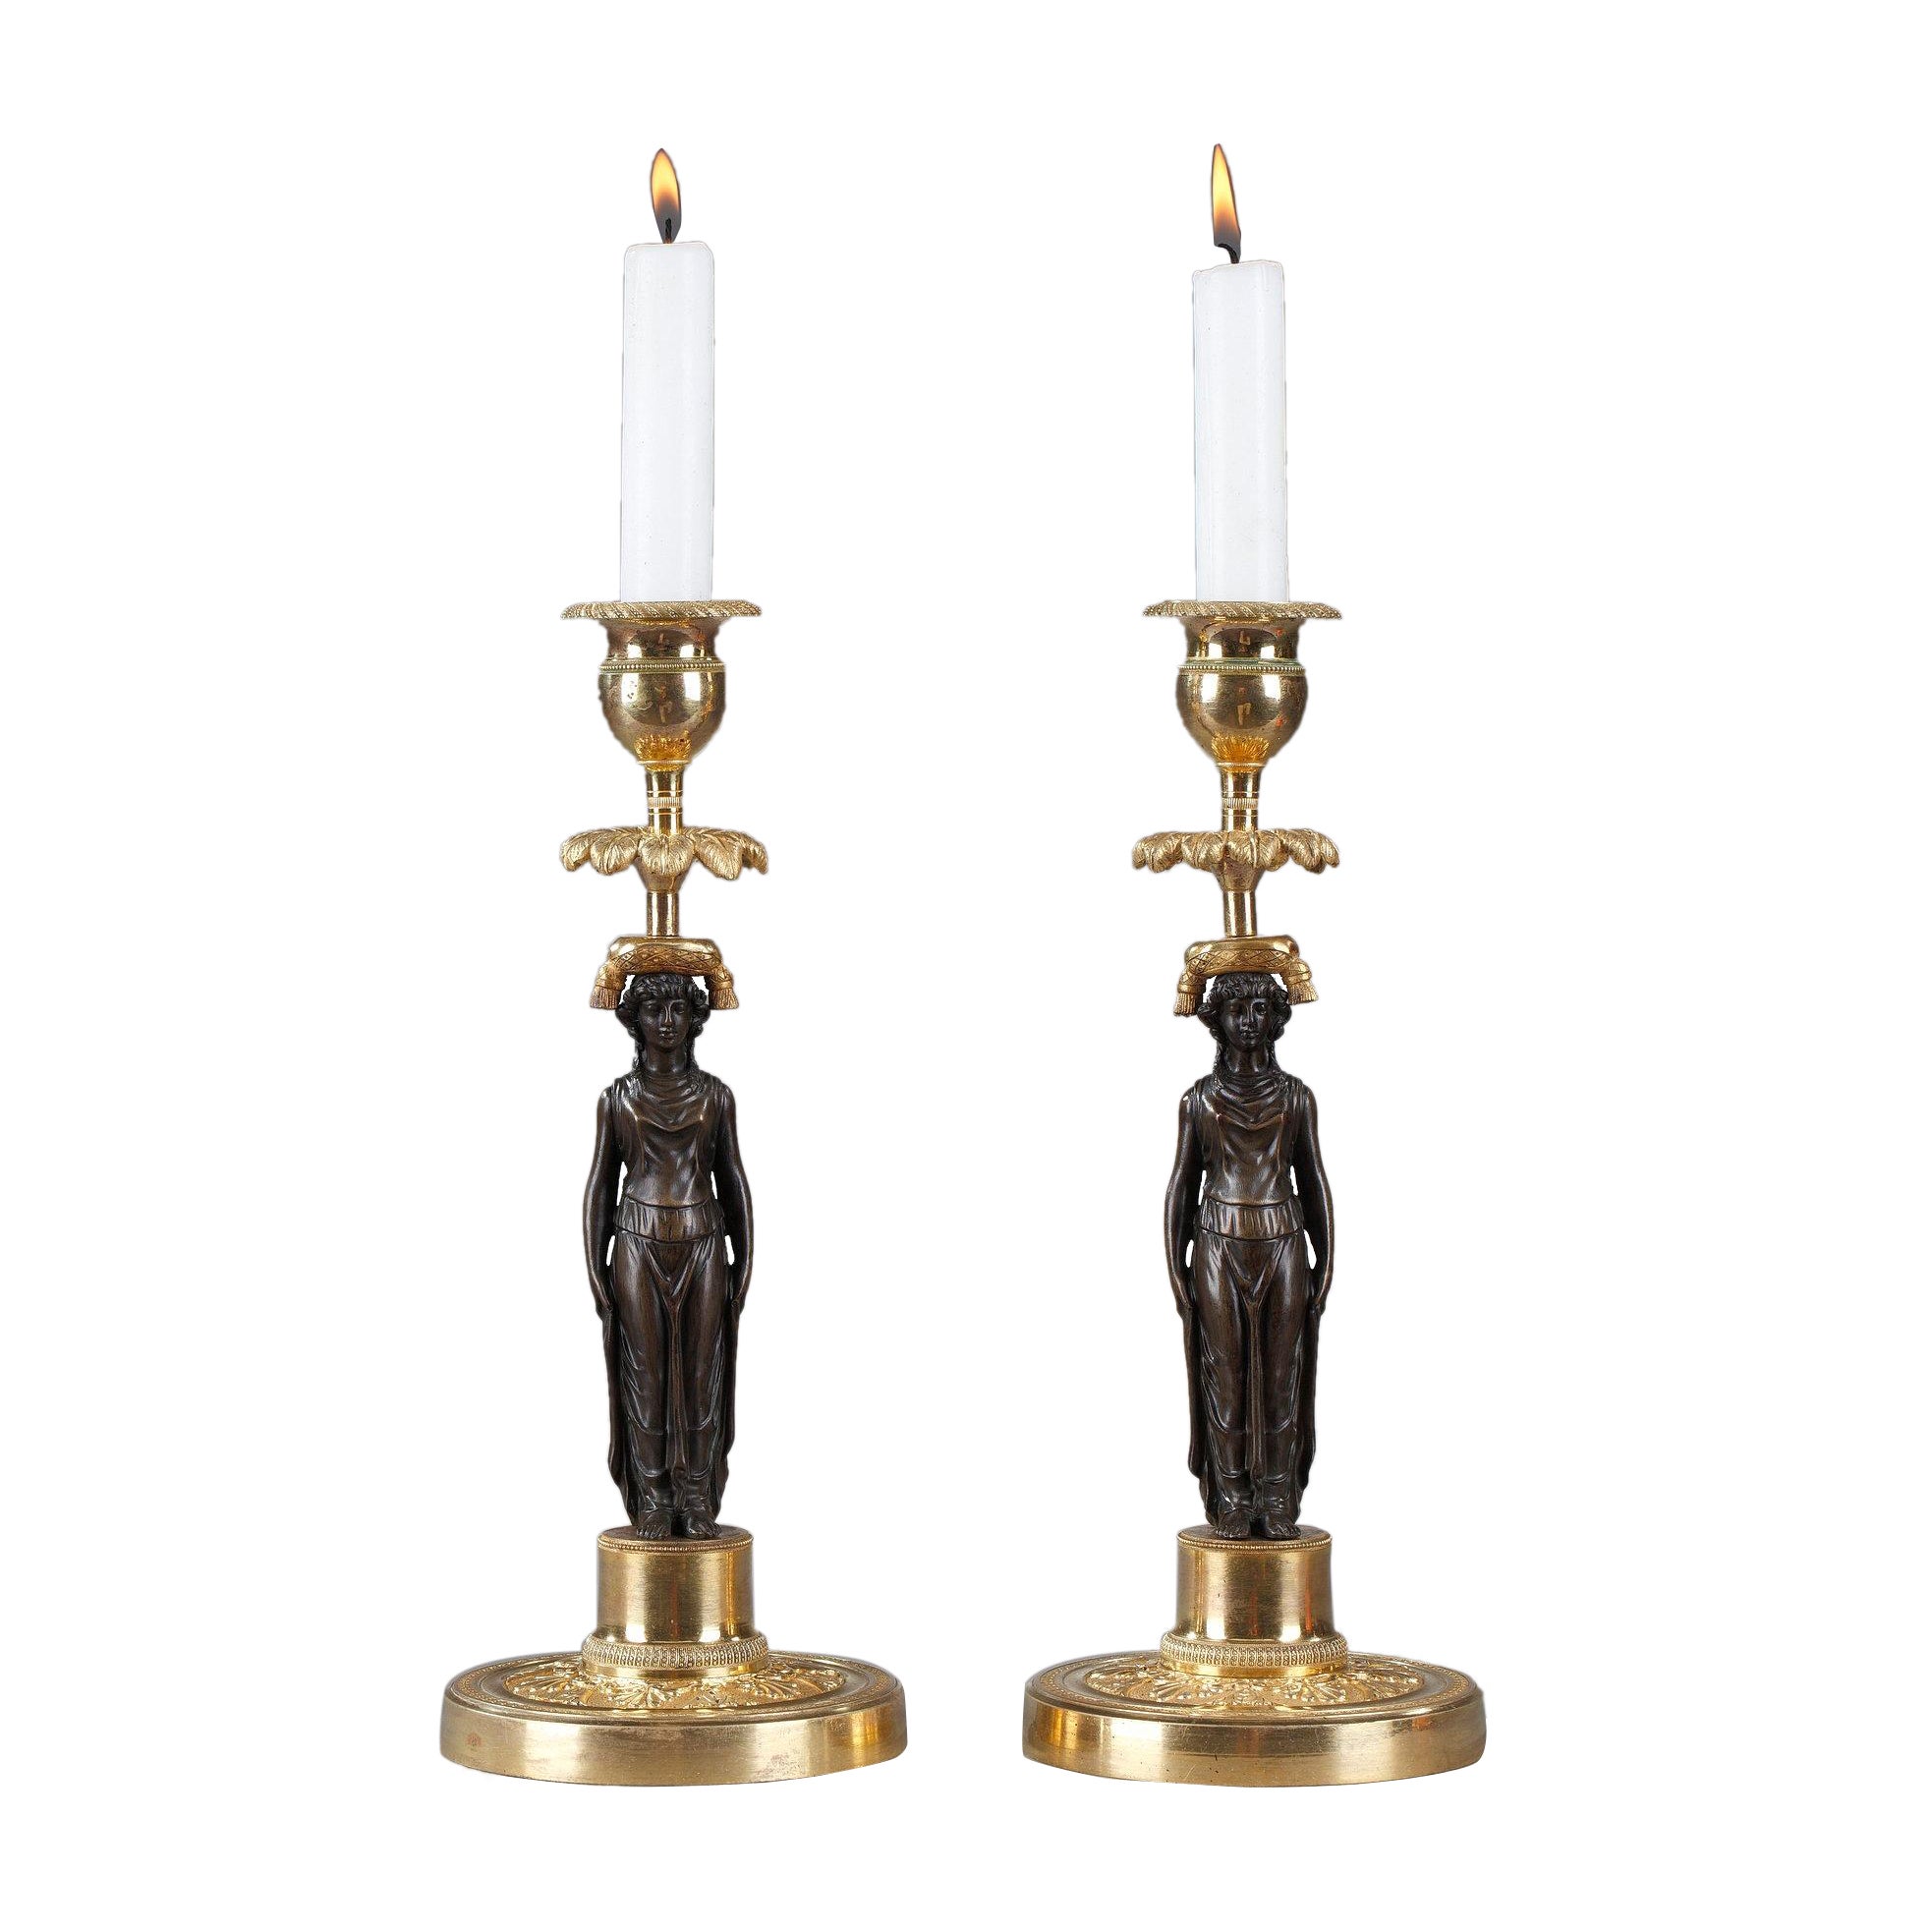 Pair of Candlesticks in Patinated and Gilded Bronze